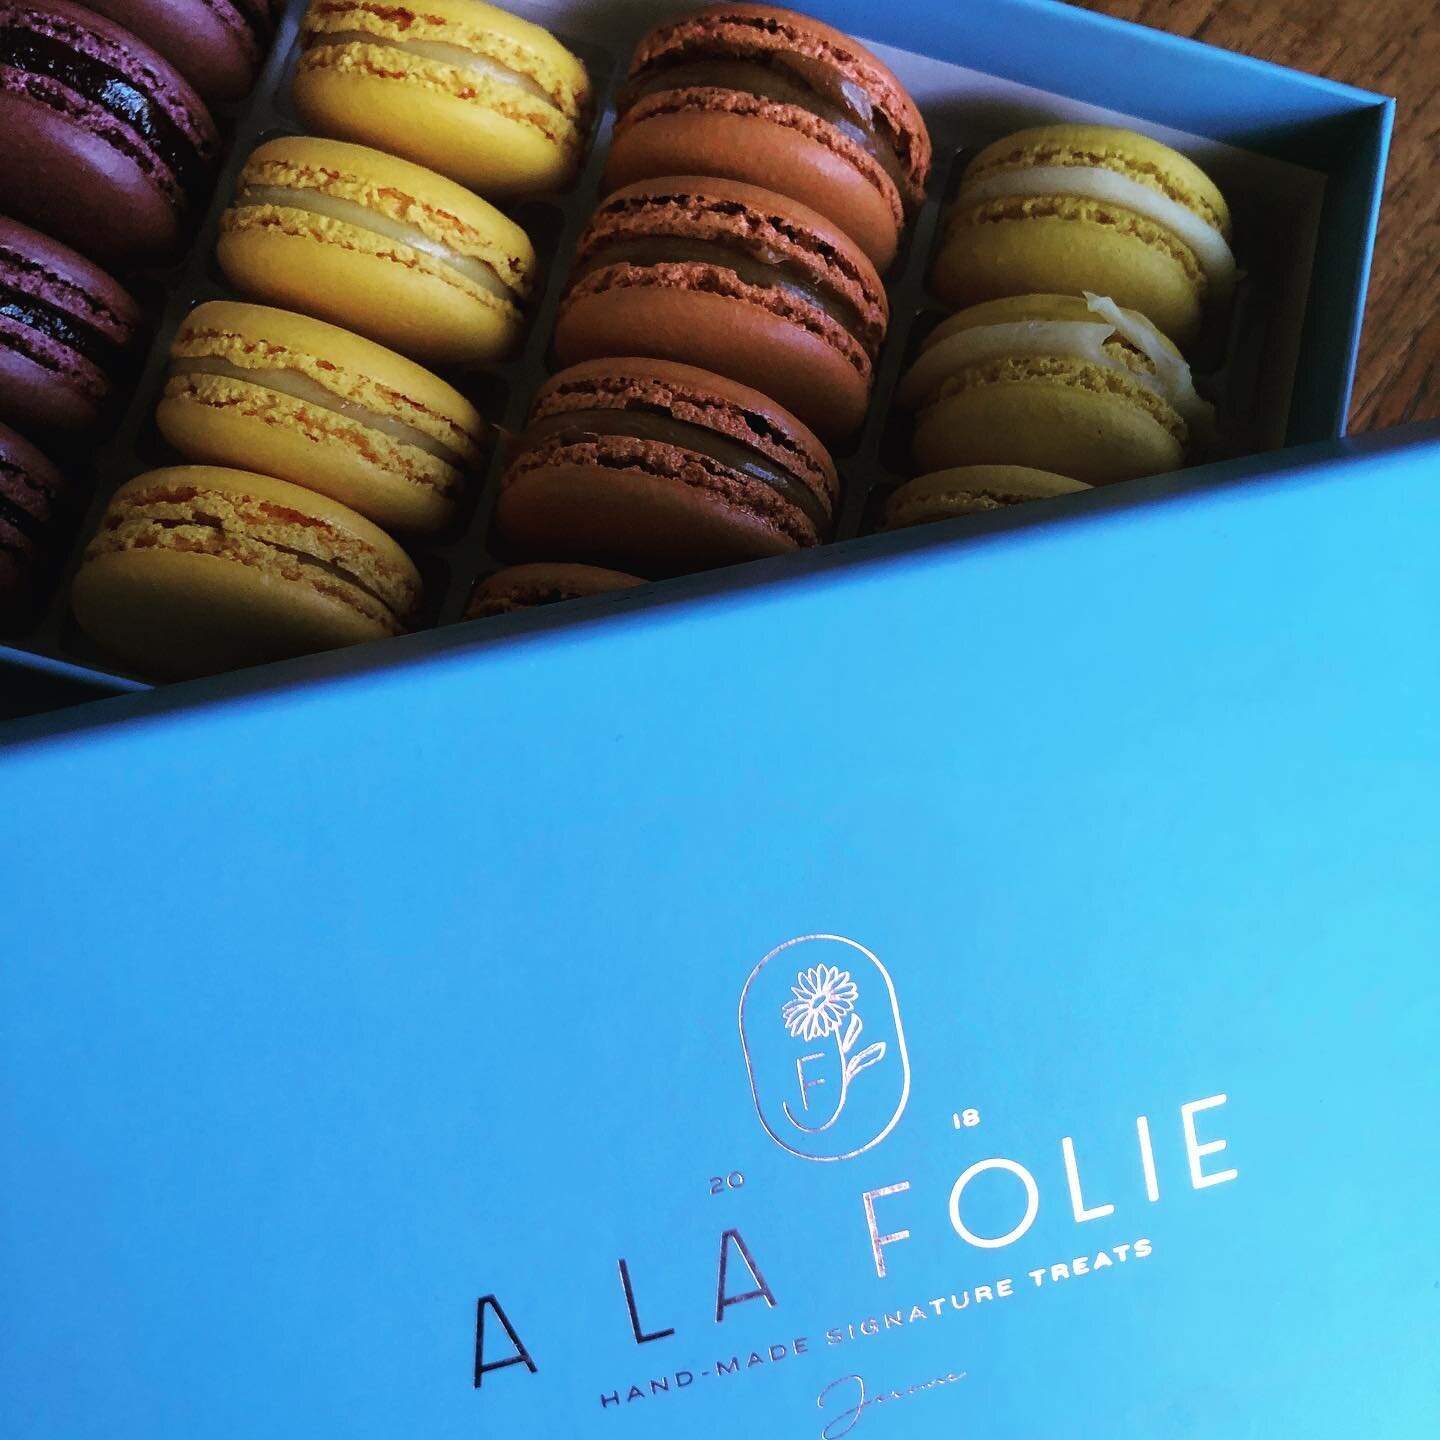 Who says you can&rsquo;t get authentic macarons outside of Paris?! Thanks @paulstrabbing &amp; @noelashby for these wonderful treats from @alafolieco  #francophile #travelforfood #patisserie #frenchmacarons